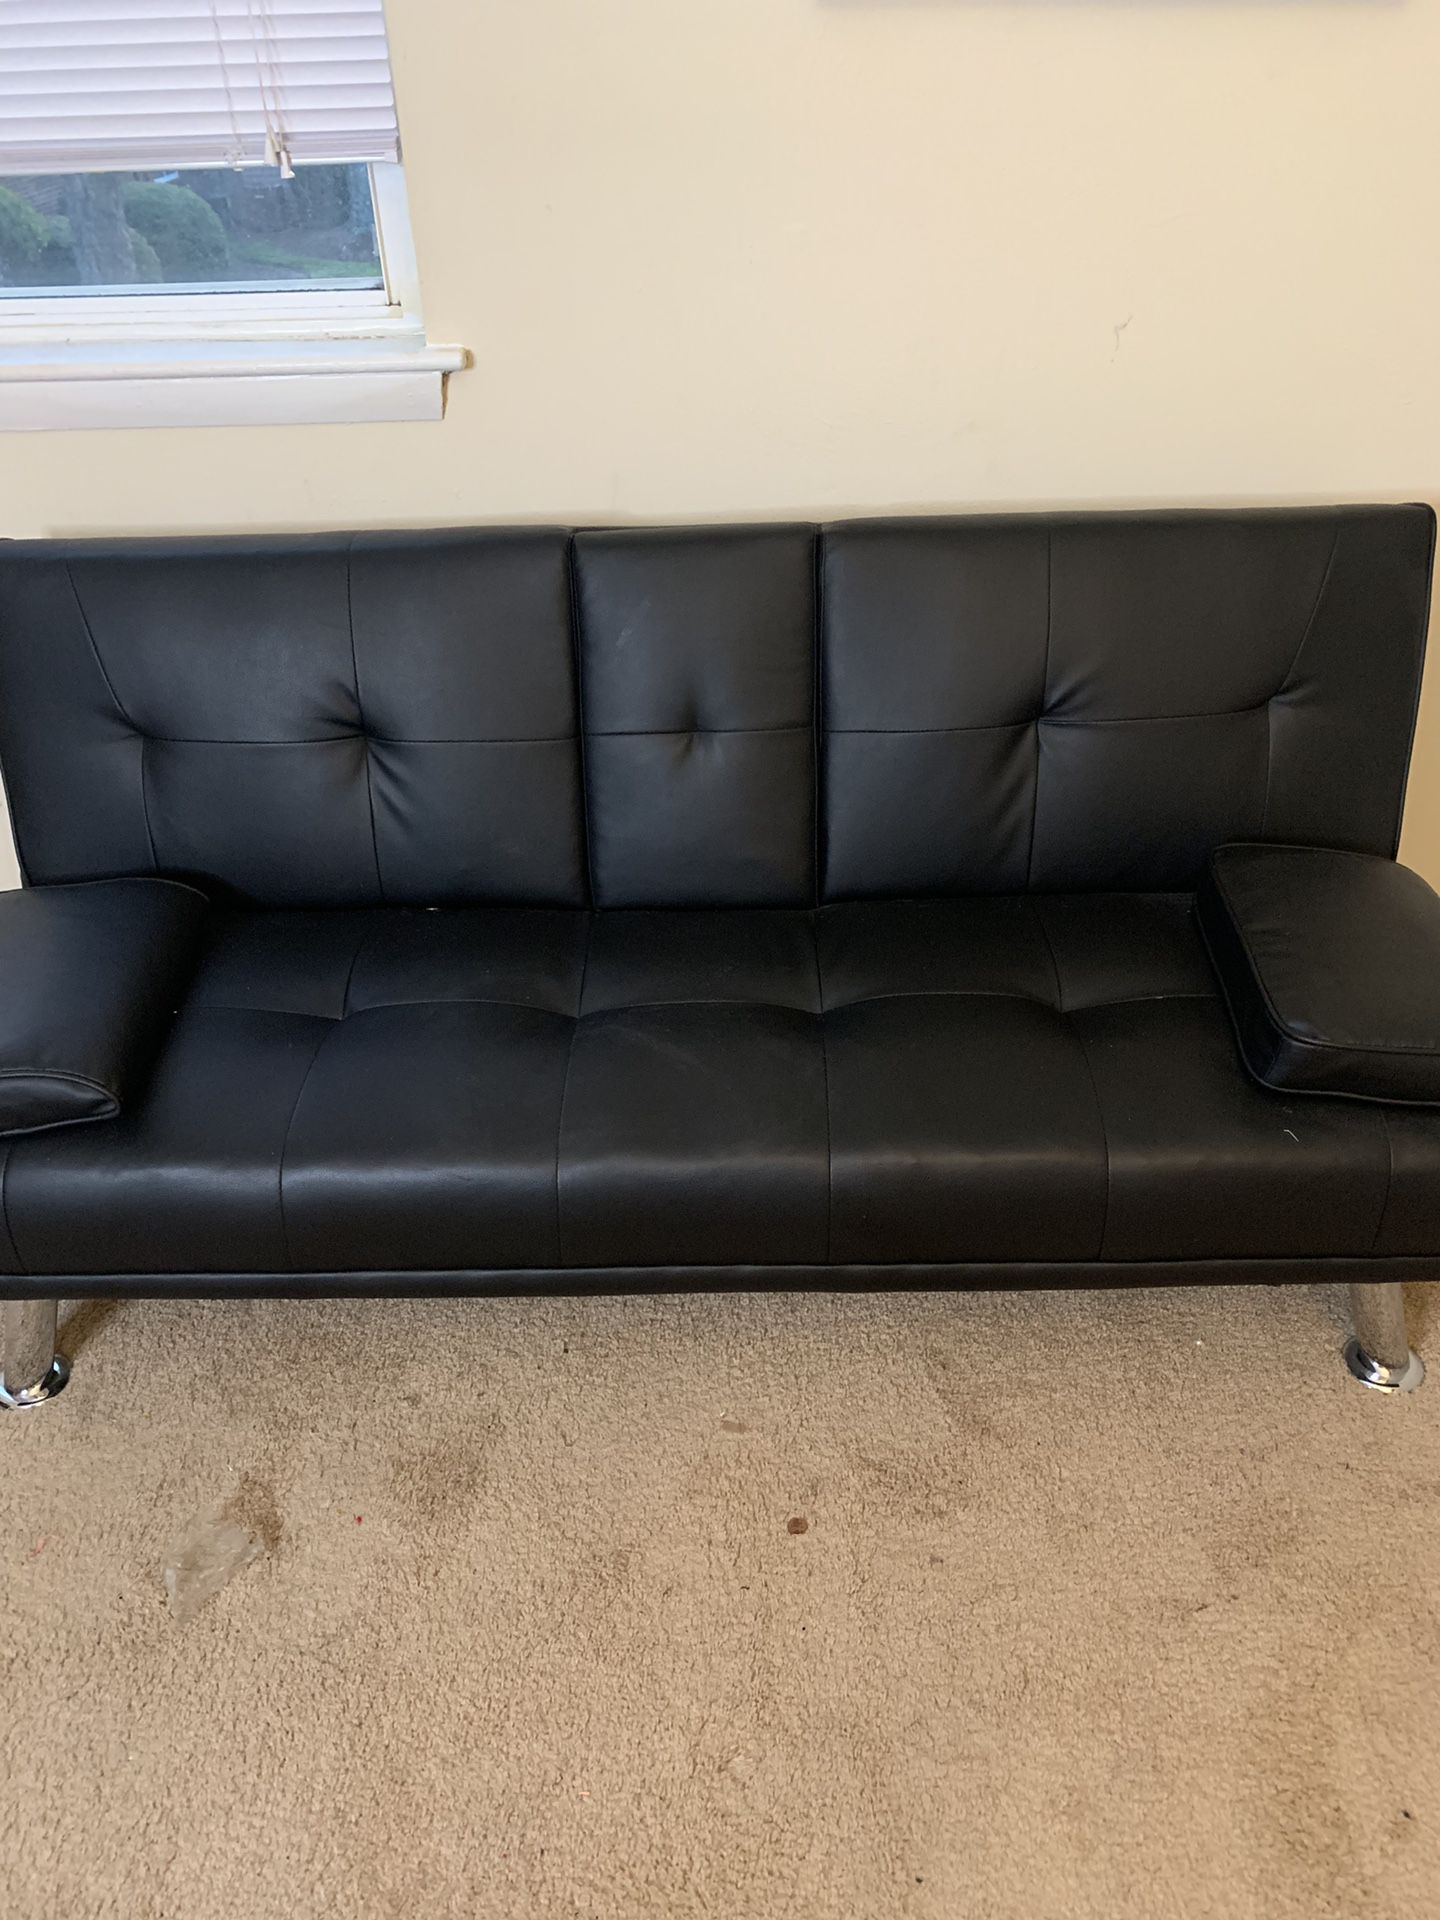 Chair/couch